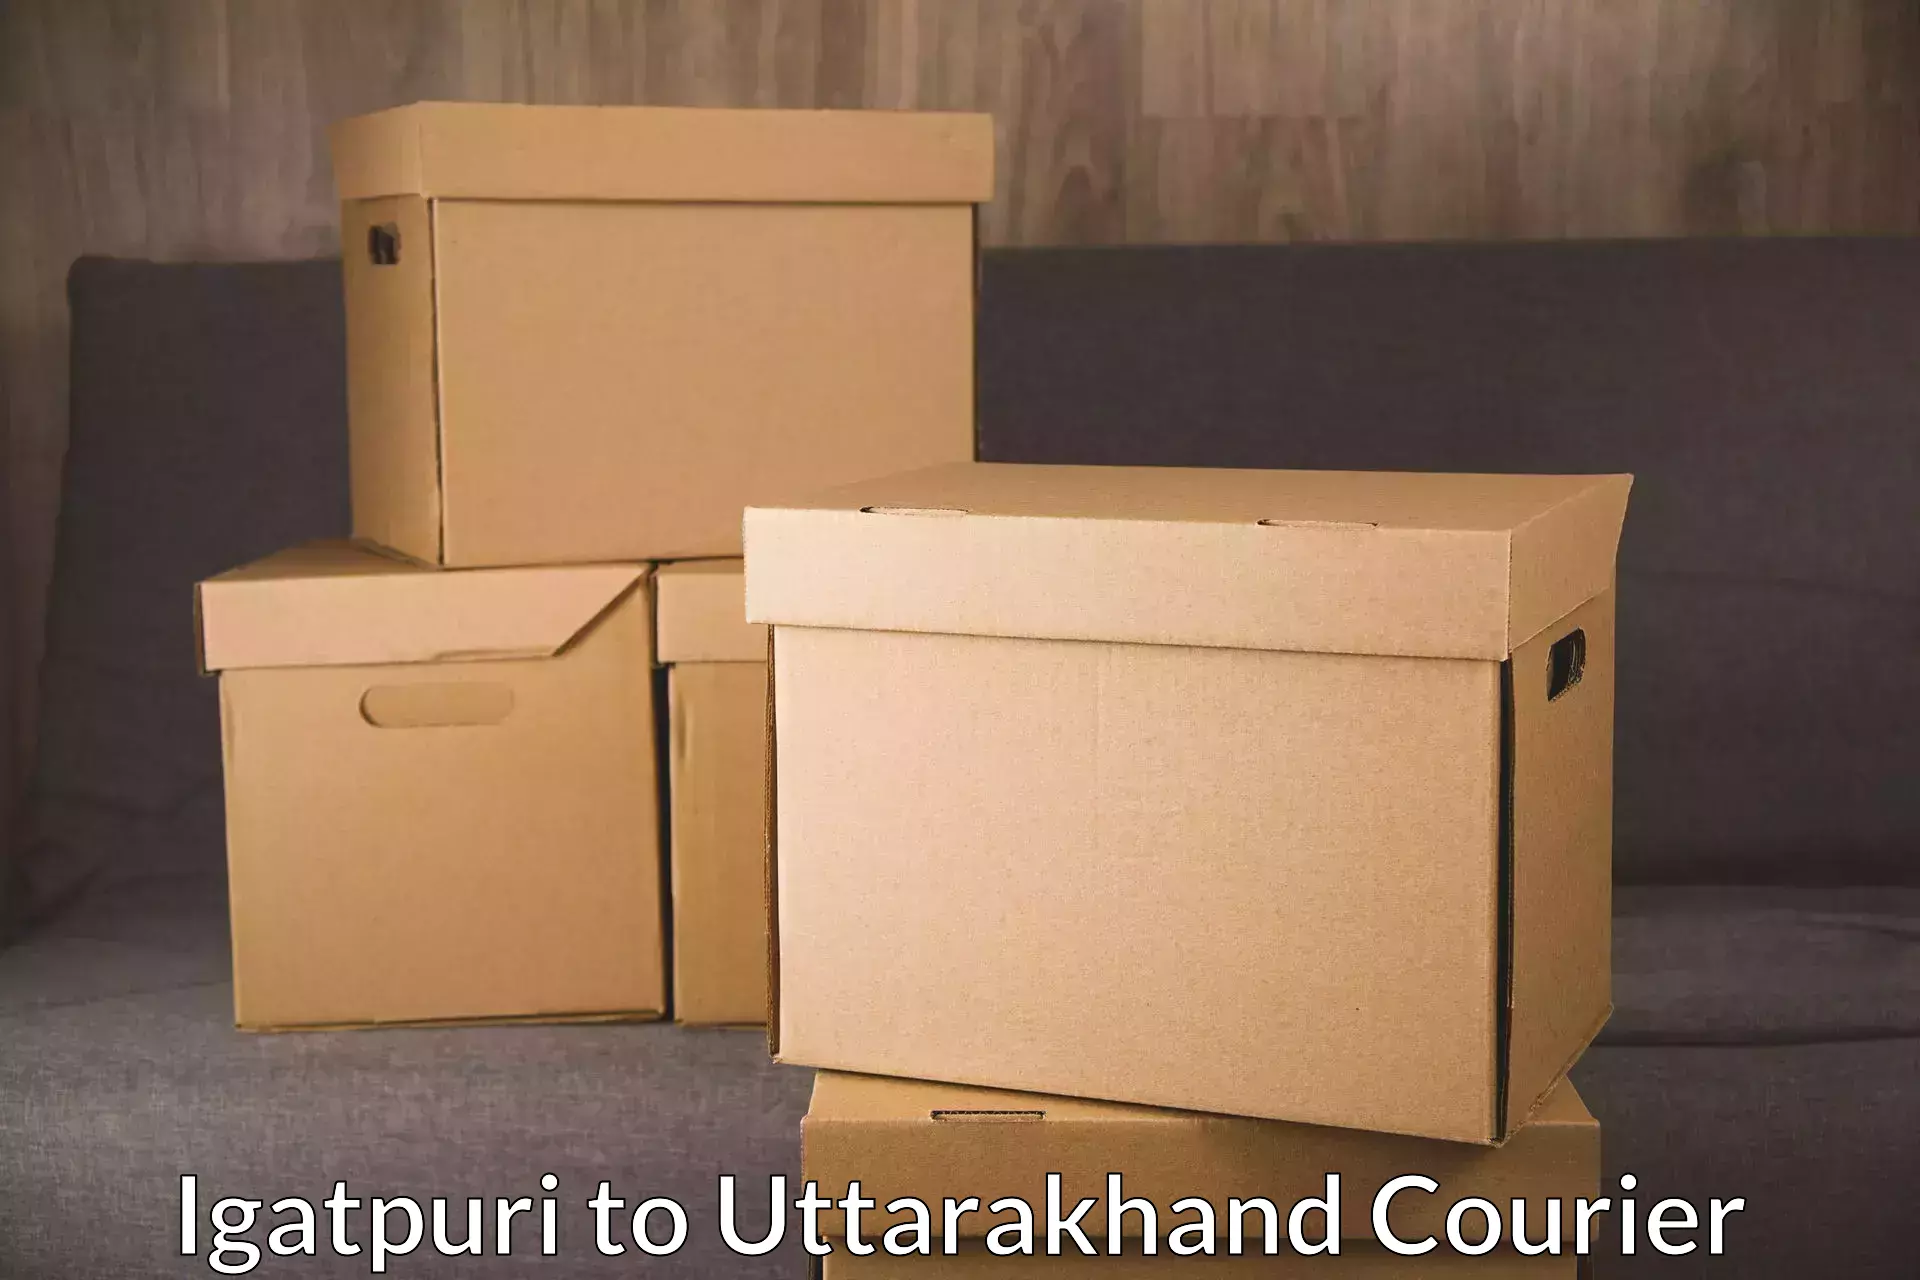 State-of-the-art courier technology Igatpuri to Tehri